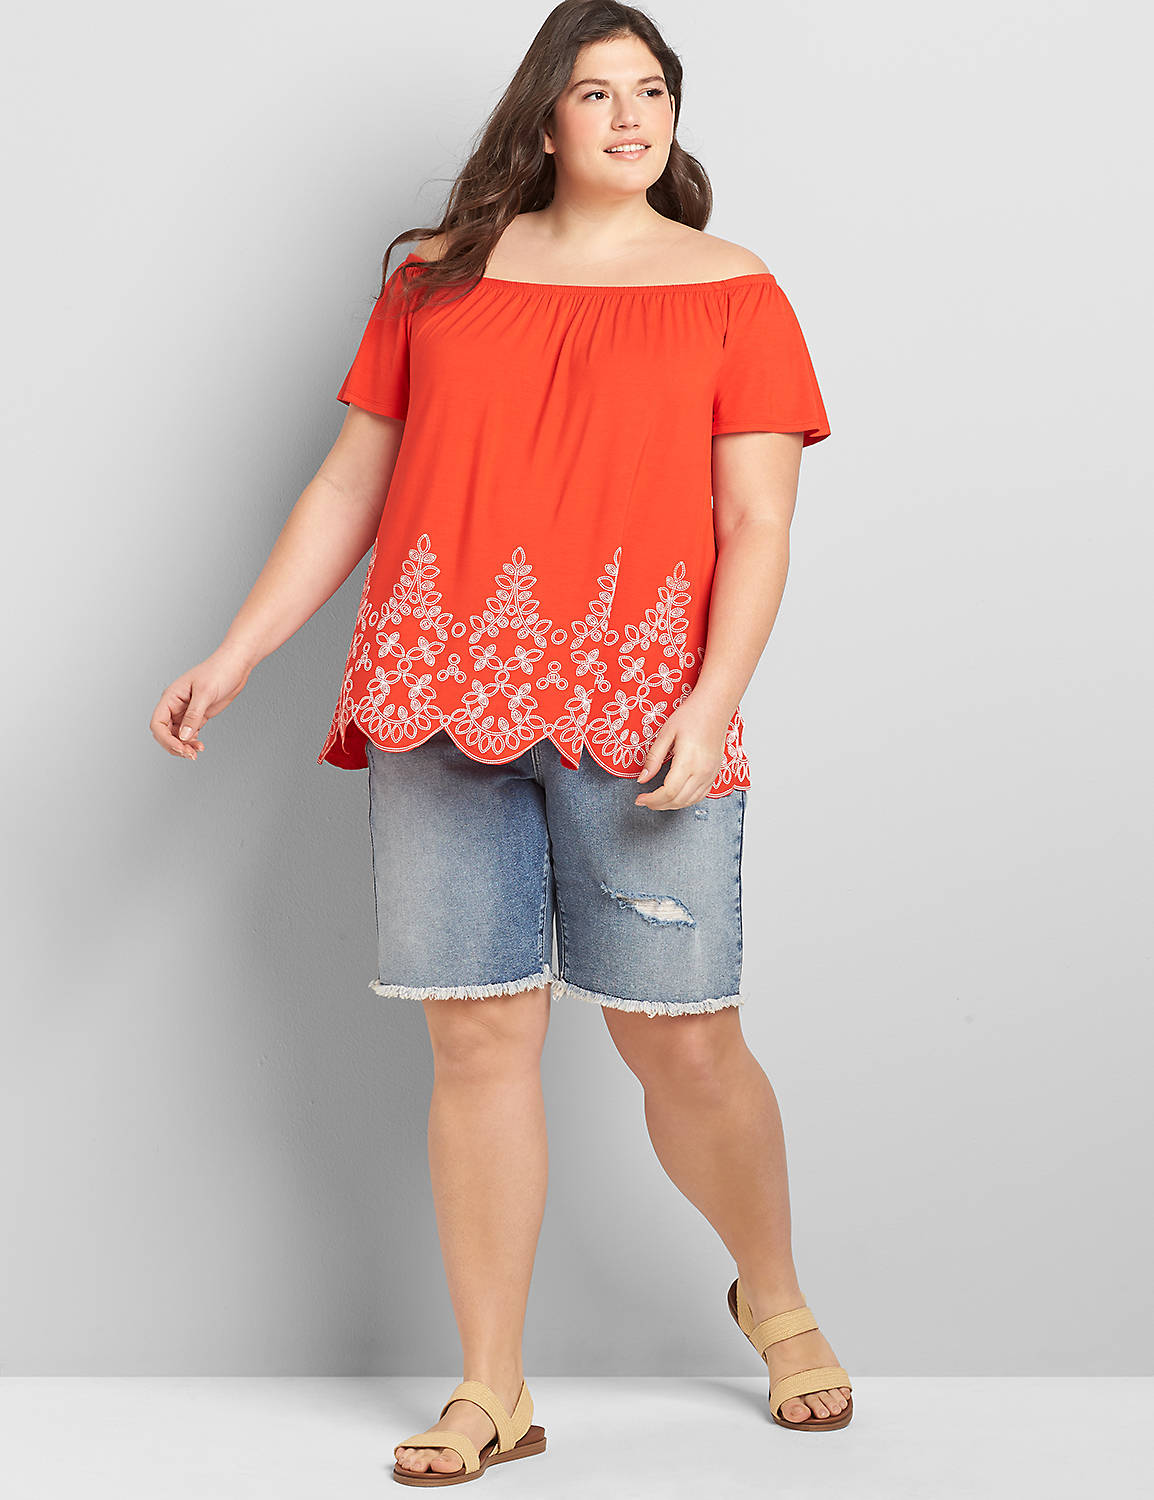 Off-The-Shoulder Swing Top With Printed Hem Product Image 3